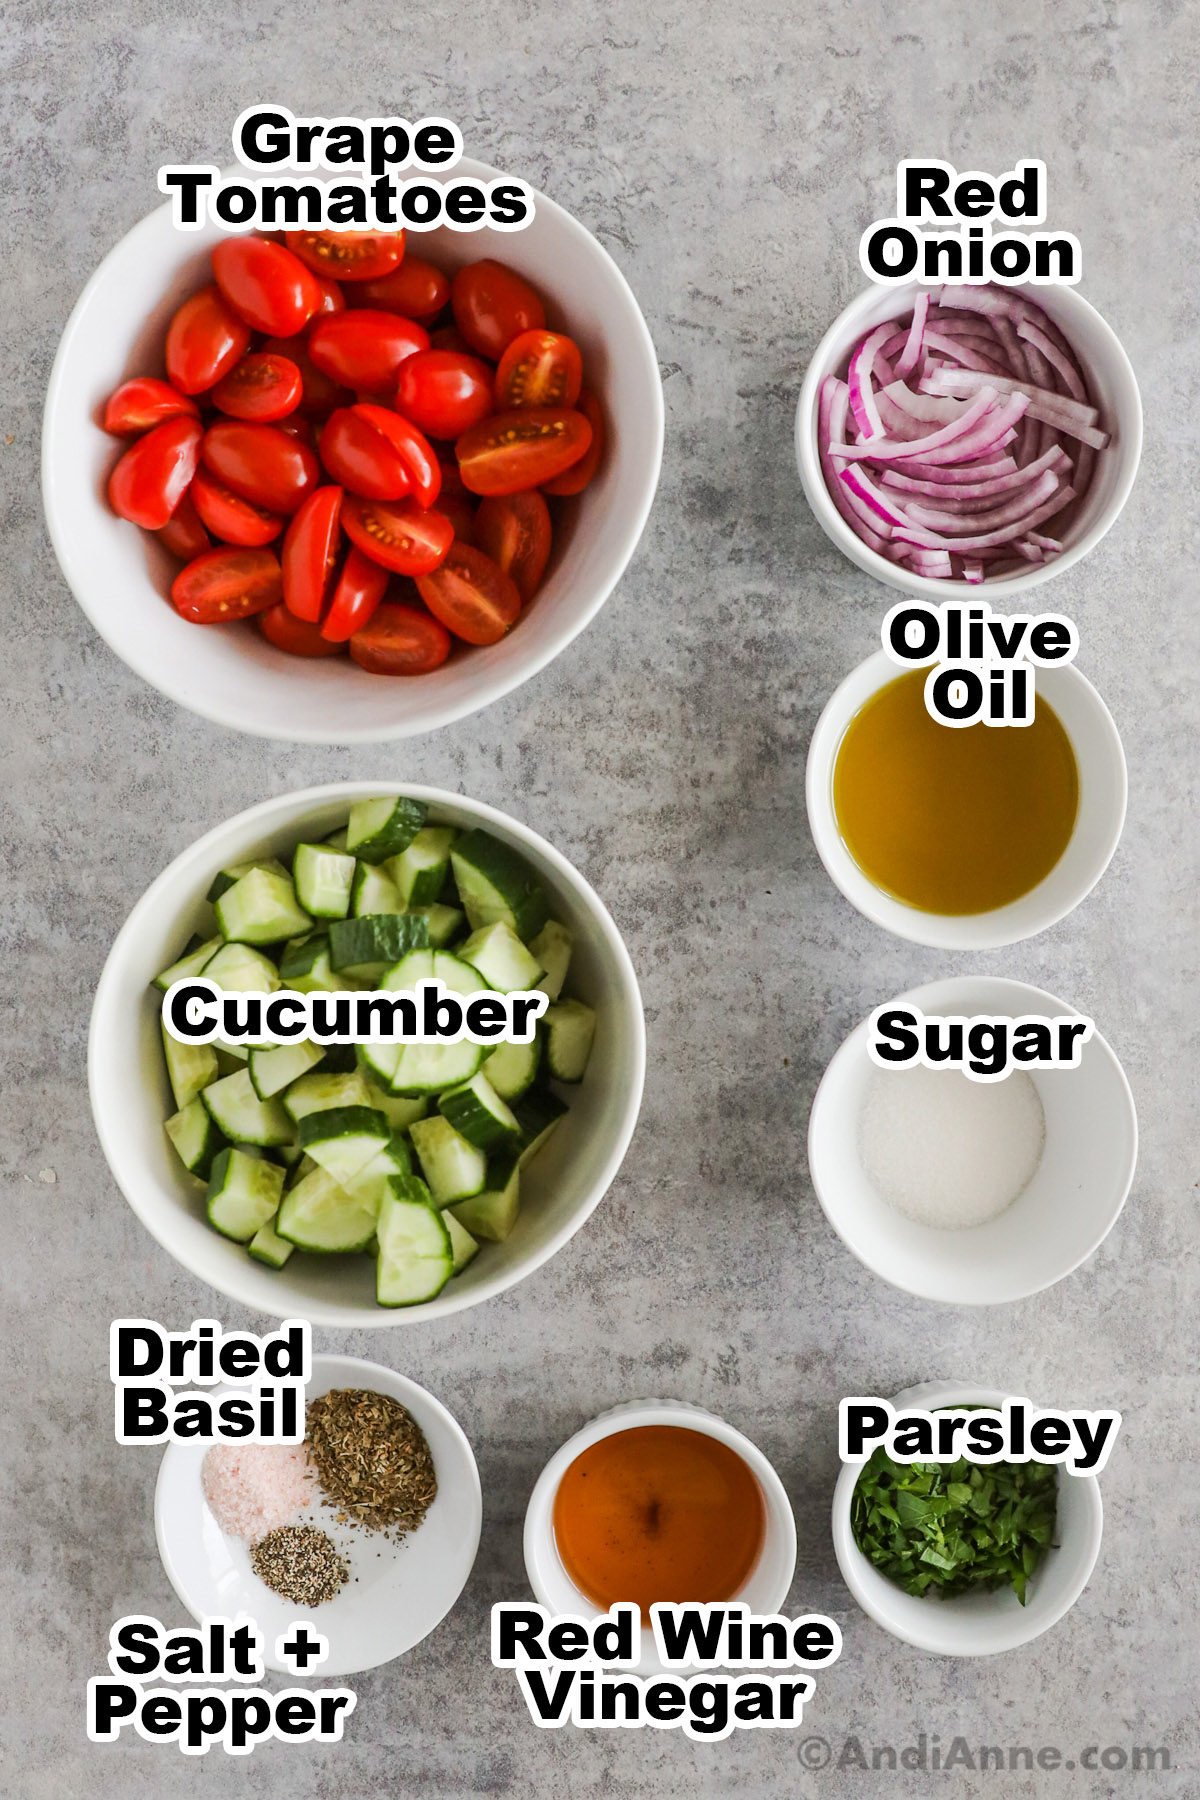 Recipe ingredients including bowls of grape tomatoes, sliced red onion, olive oil, cucumber, sugar, parsley, red wine vinegar, dried basil, salt and pepper.